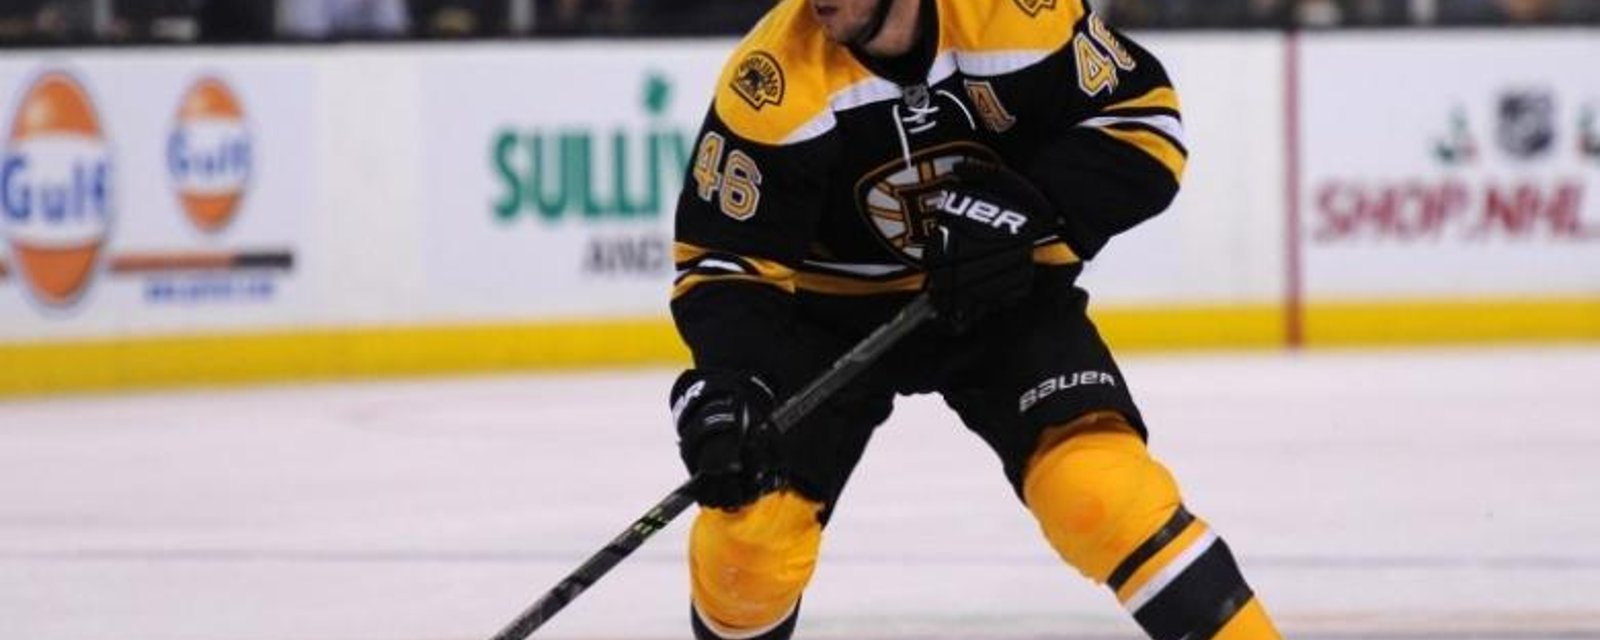 5 Statistical Nuggets From The Bruins’ First Half Of The Season